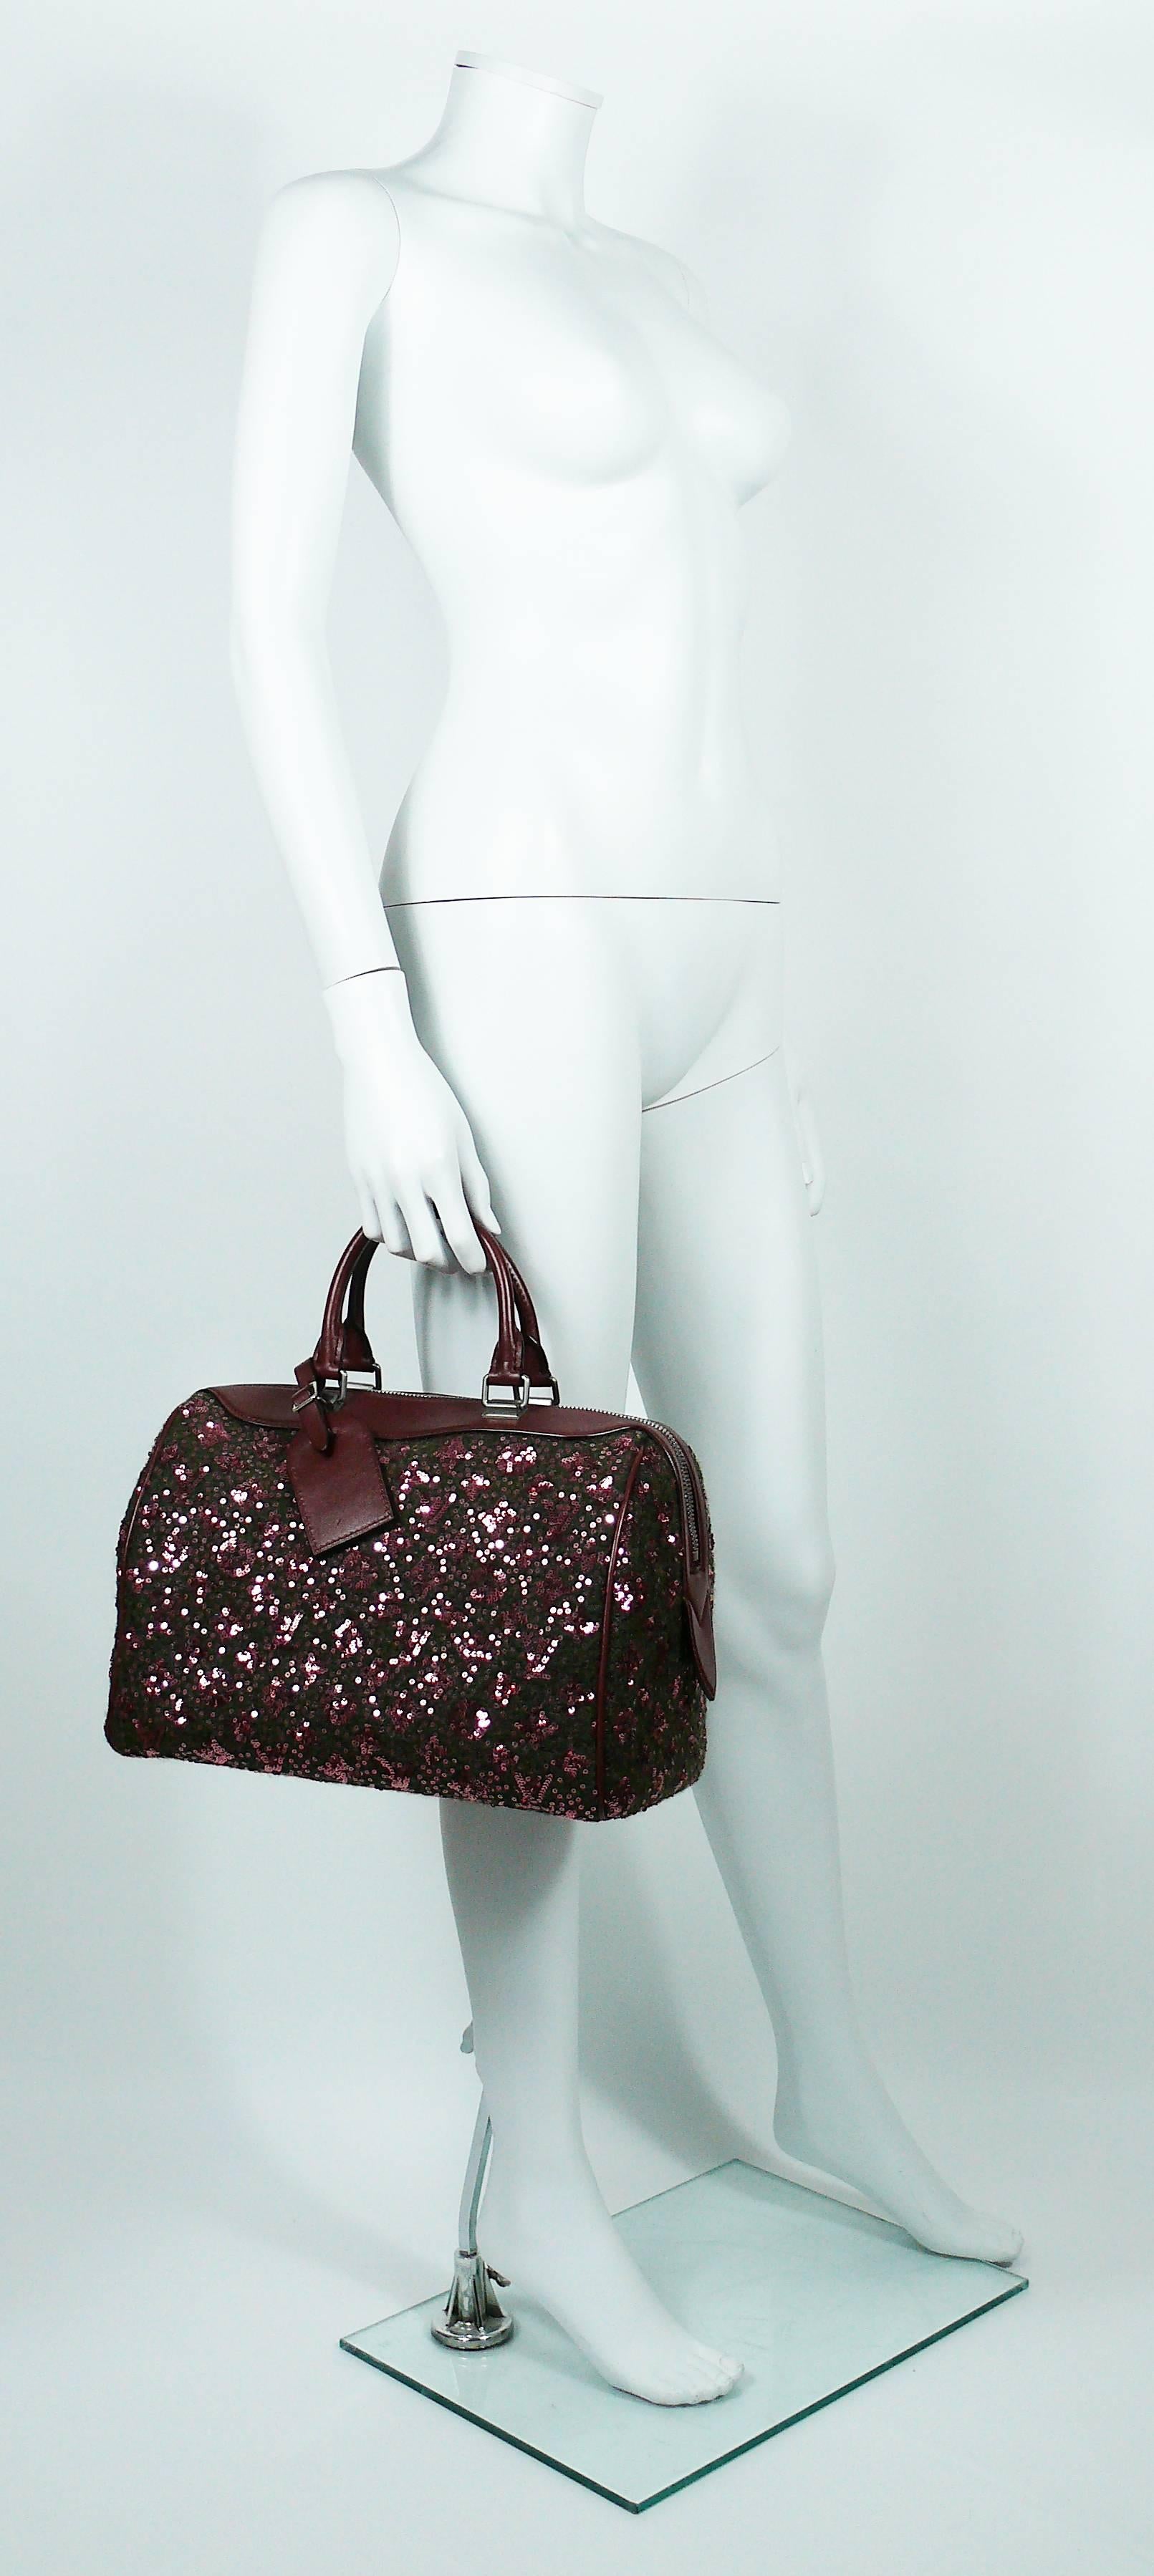 LOUIS VUITTON Limited Edition Sunshine Express Speedy.

This bag features : 
- Felted wool body with embroidered sequined iconic Monogram.
- Burgundy leather trim.
- Gun metal patina hardware.
- Dual rolled top handles.
- Burgundy fabric lining.
-